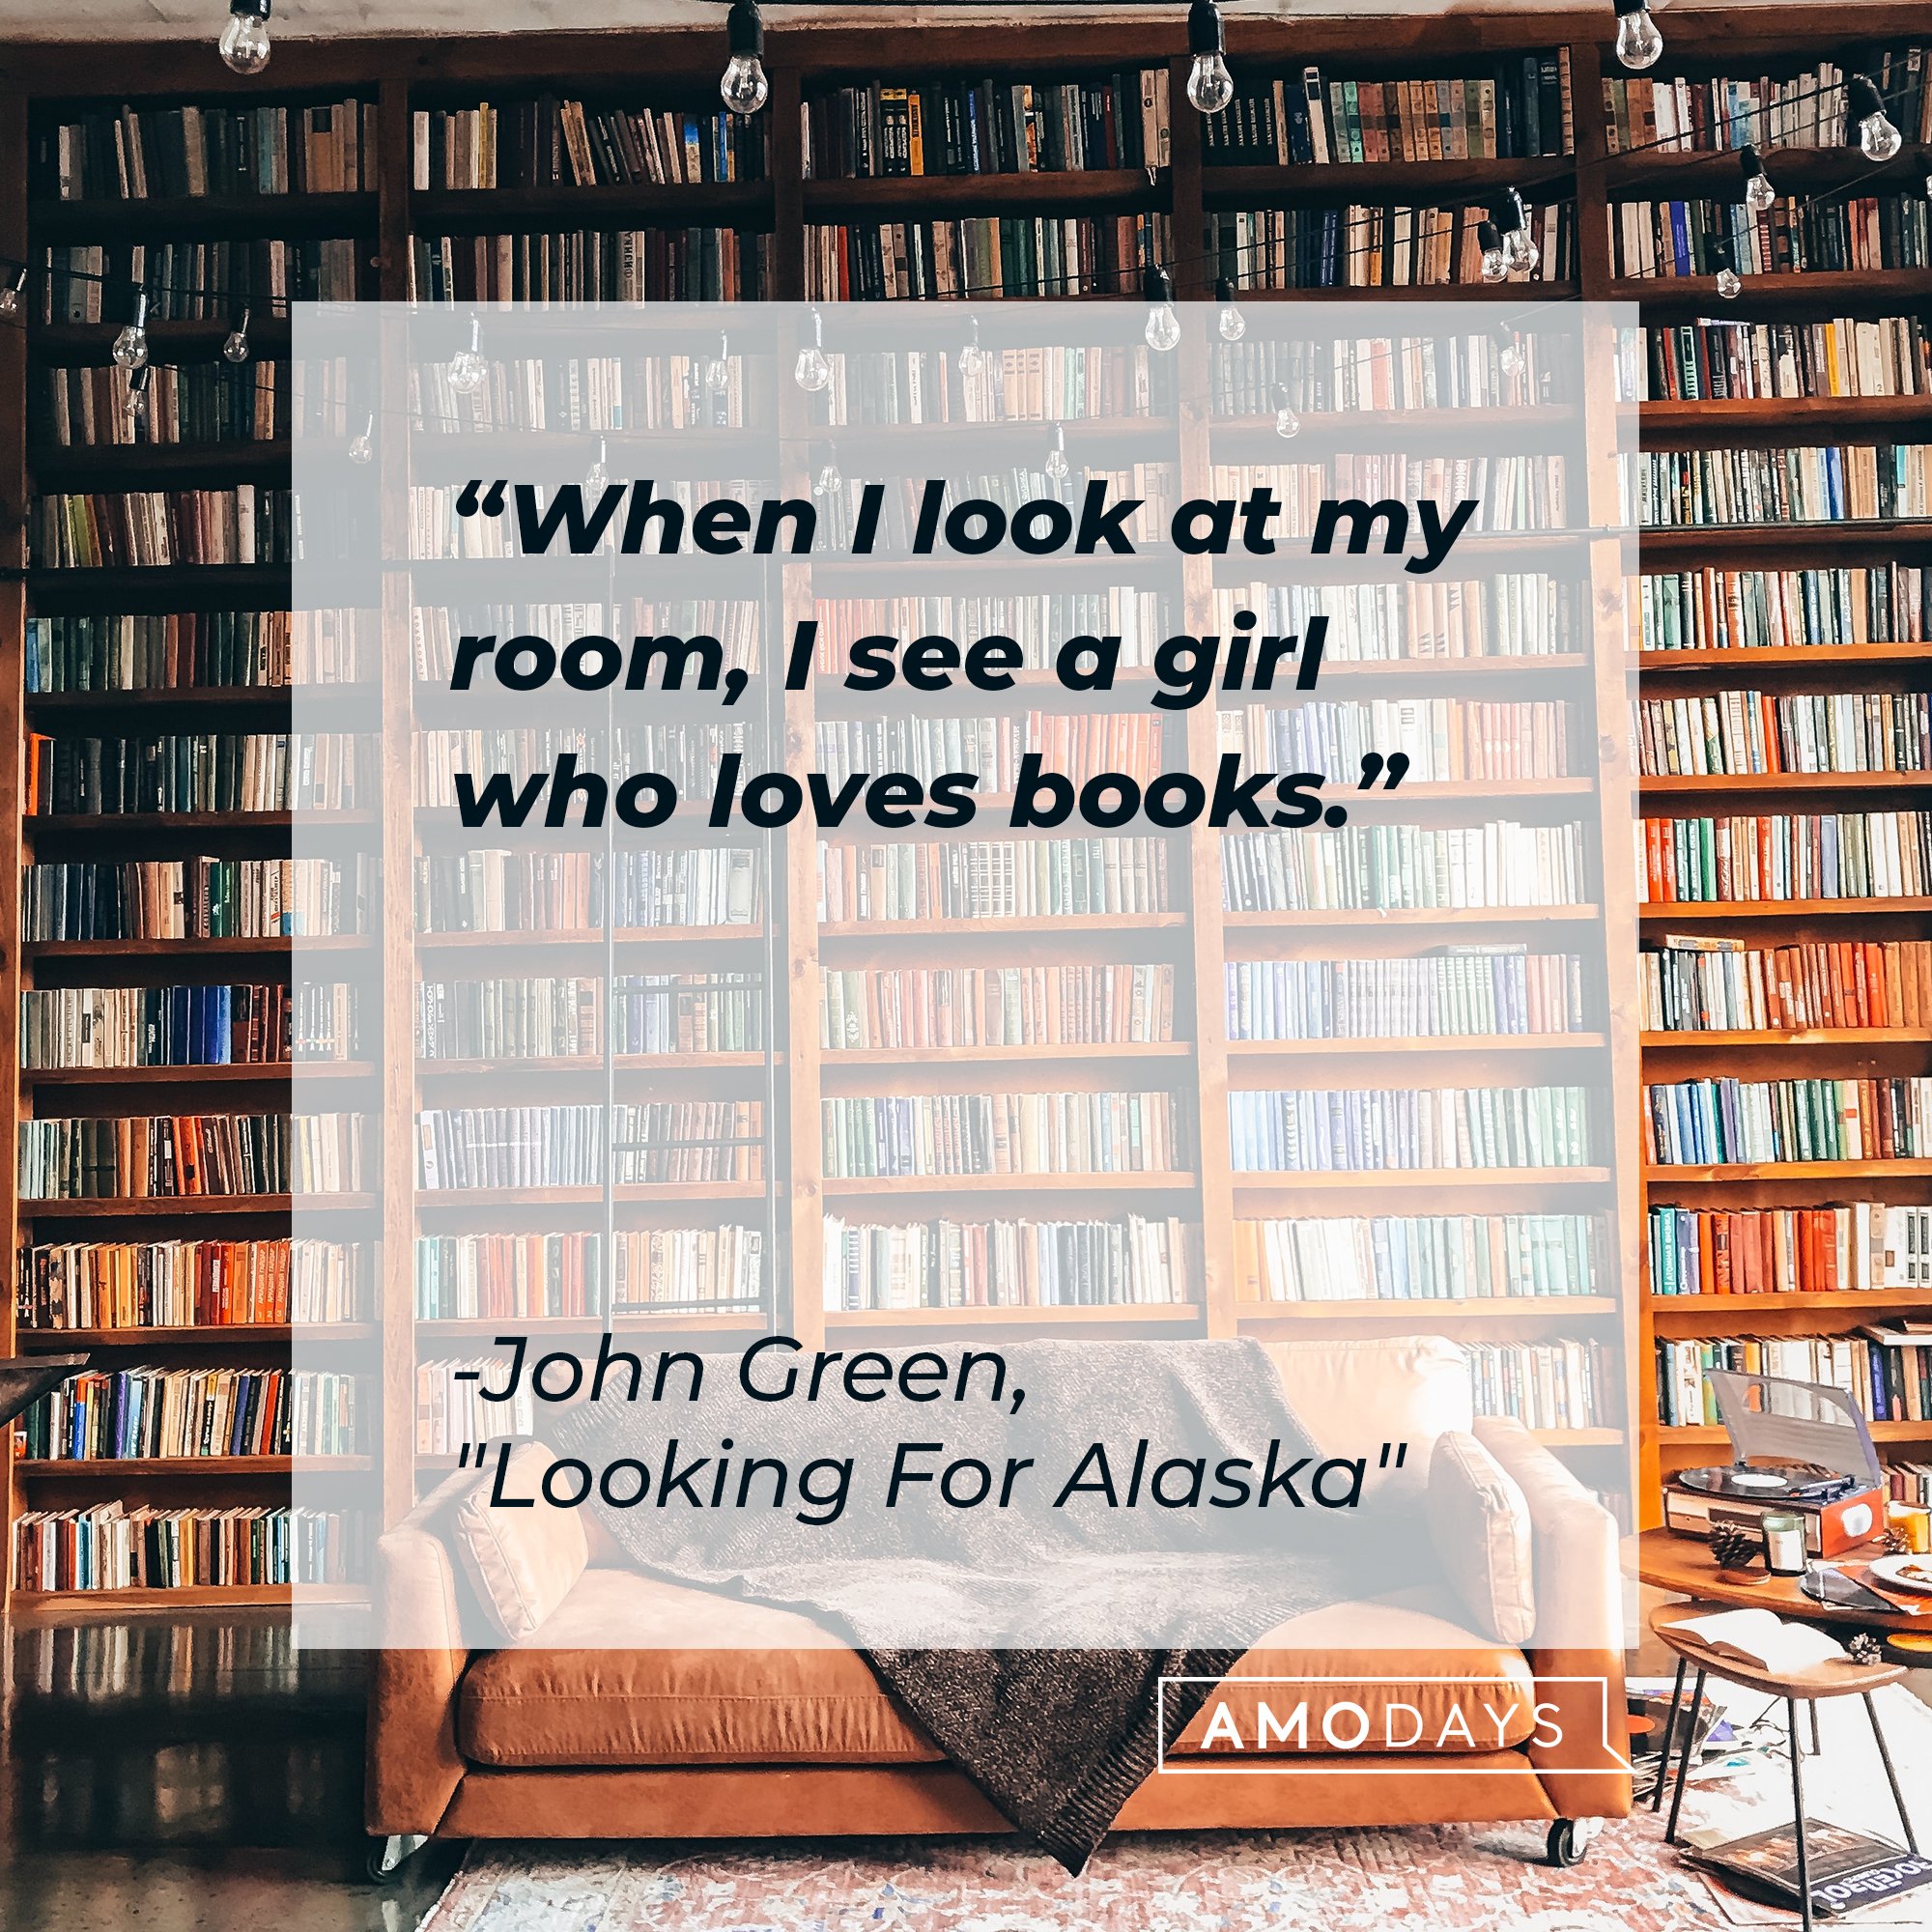 John Green’s quote from "Looking For Alaska" : "When I look at my room, I see a girl who loves books." | Image: AmoDays